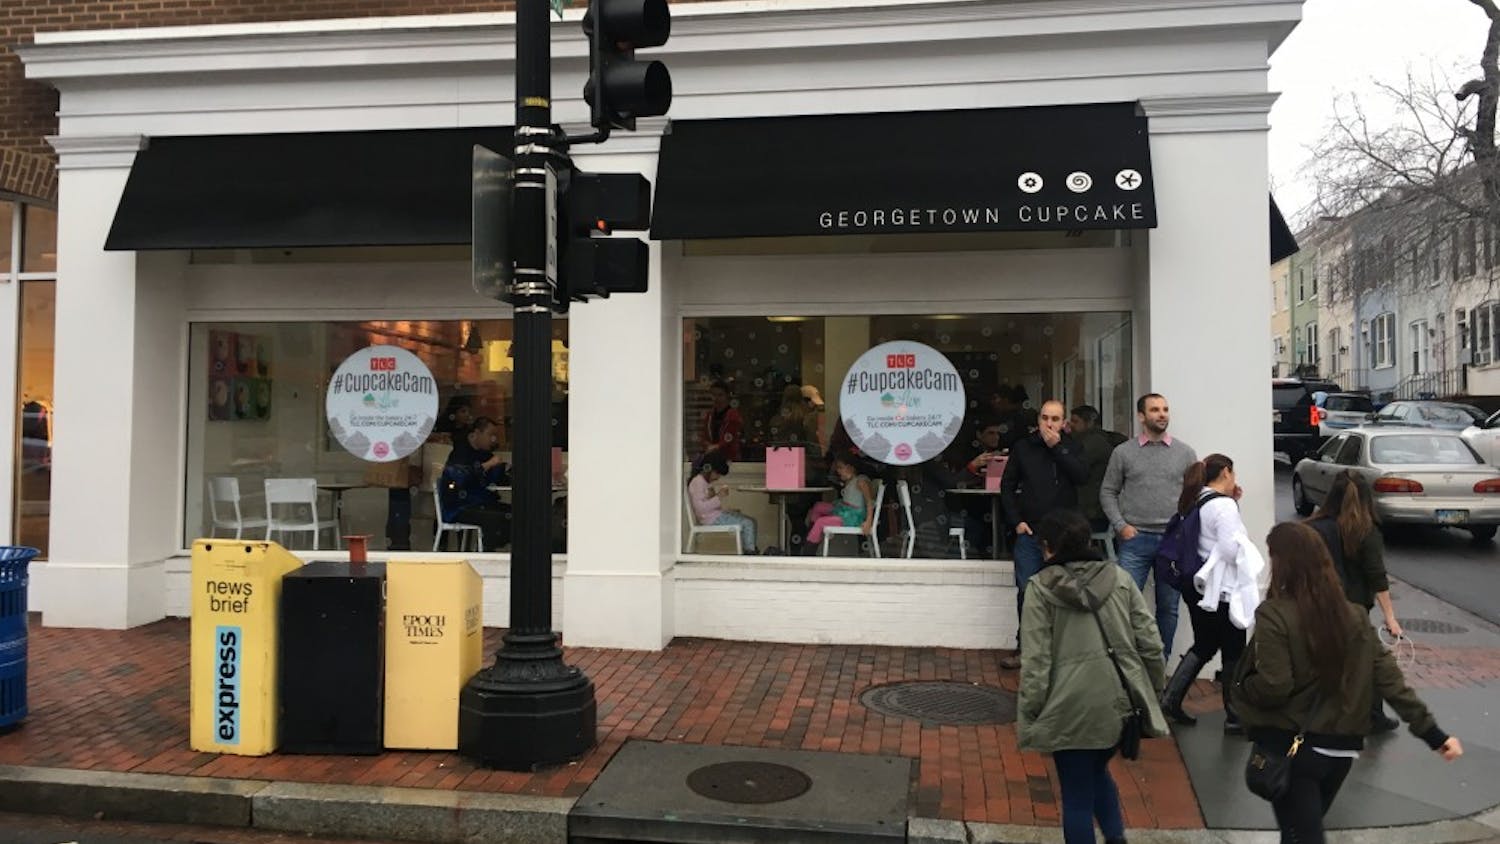 The Georgetown Cupcake storefront in Georgetown.